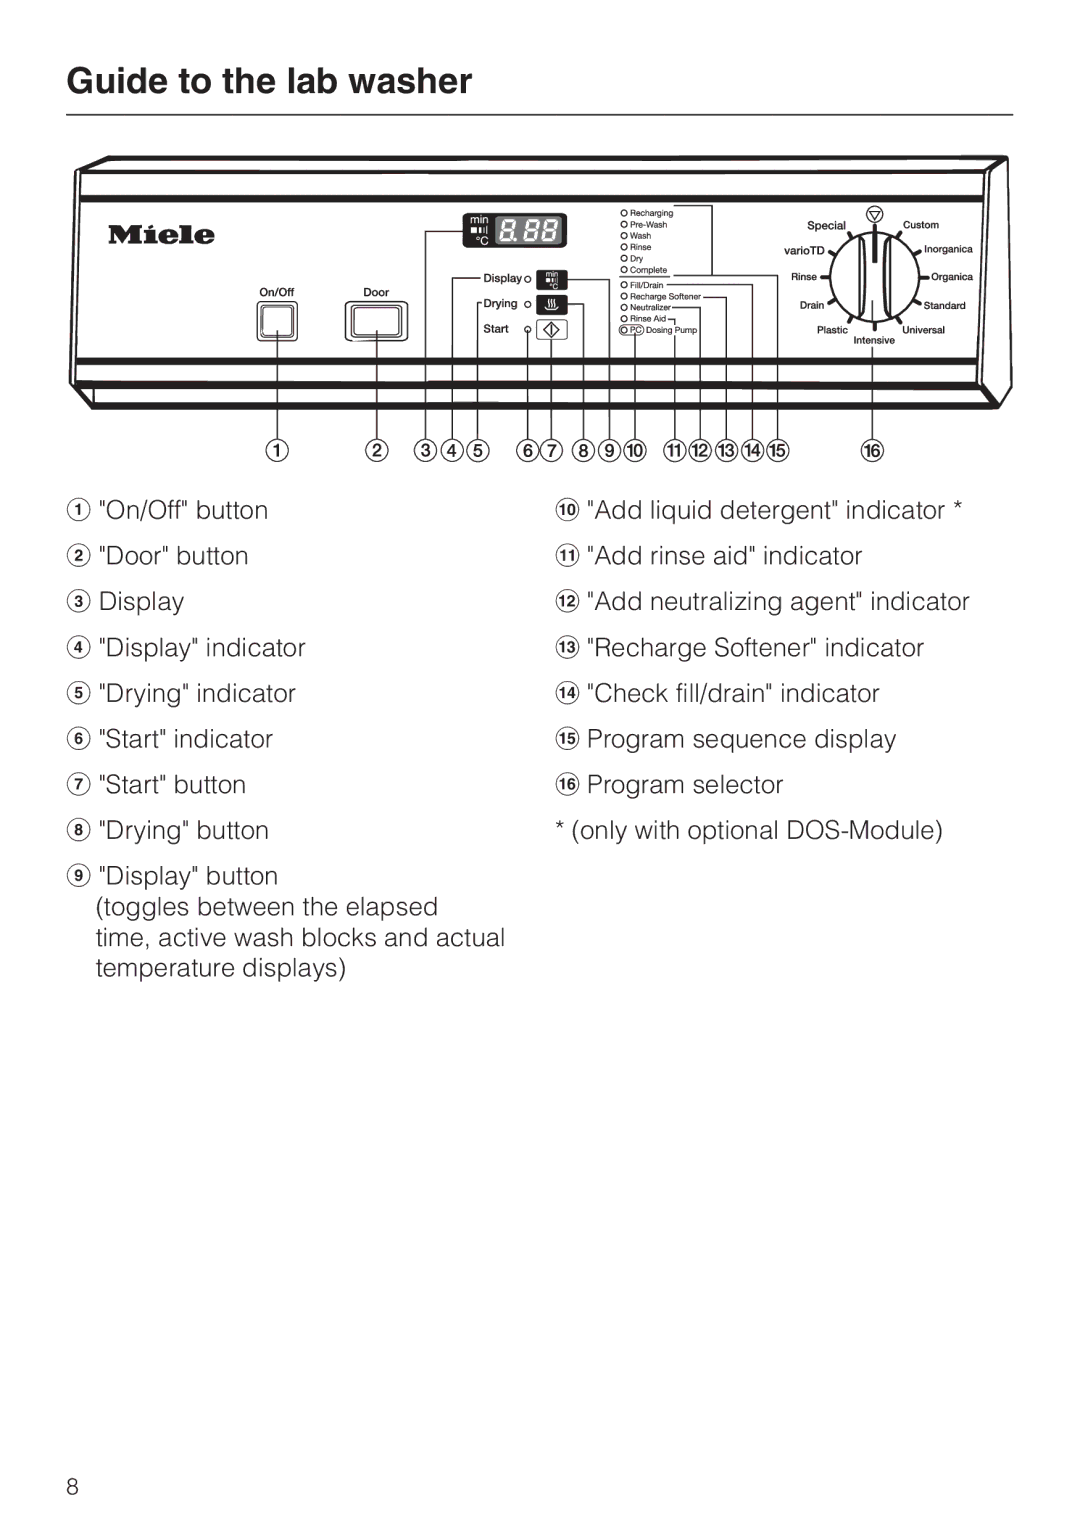 Miele G 7883 operating instructions Guide to the lab washer 